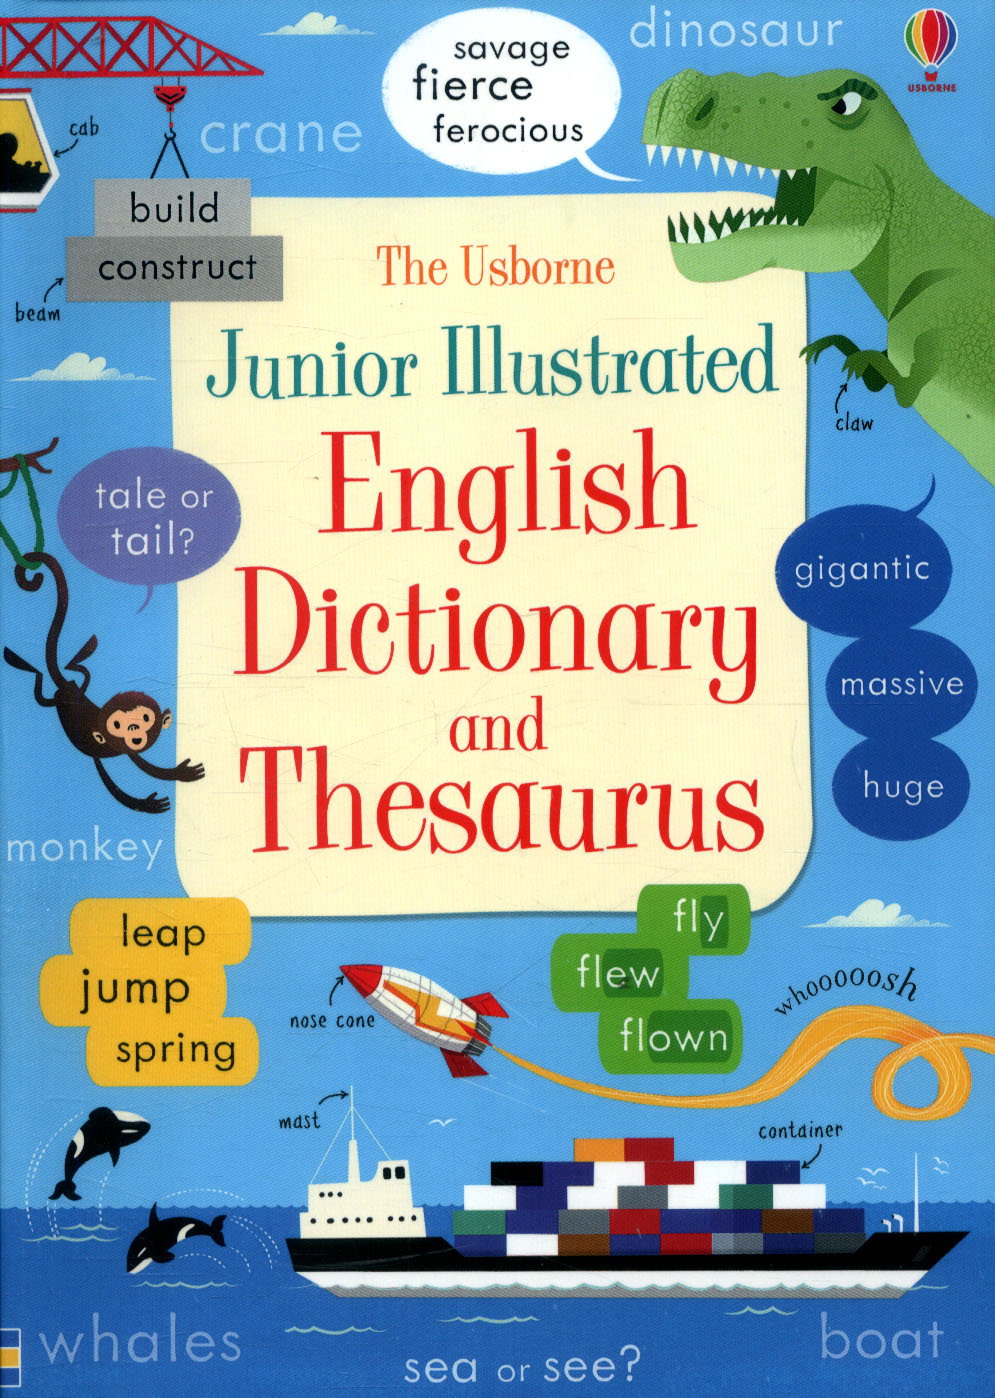 The Usborne junior illustrated English dictionary and thesaurus by